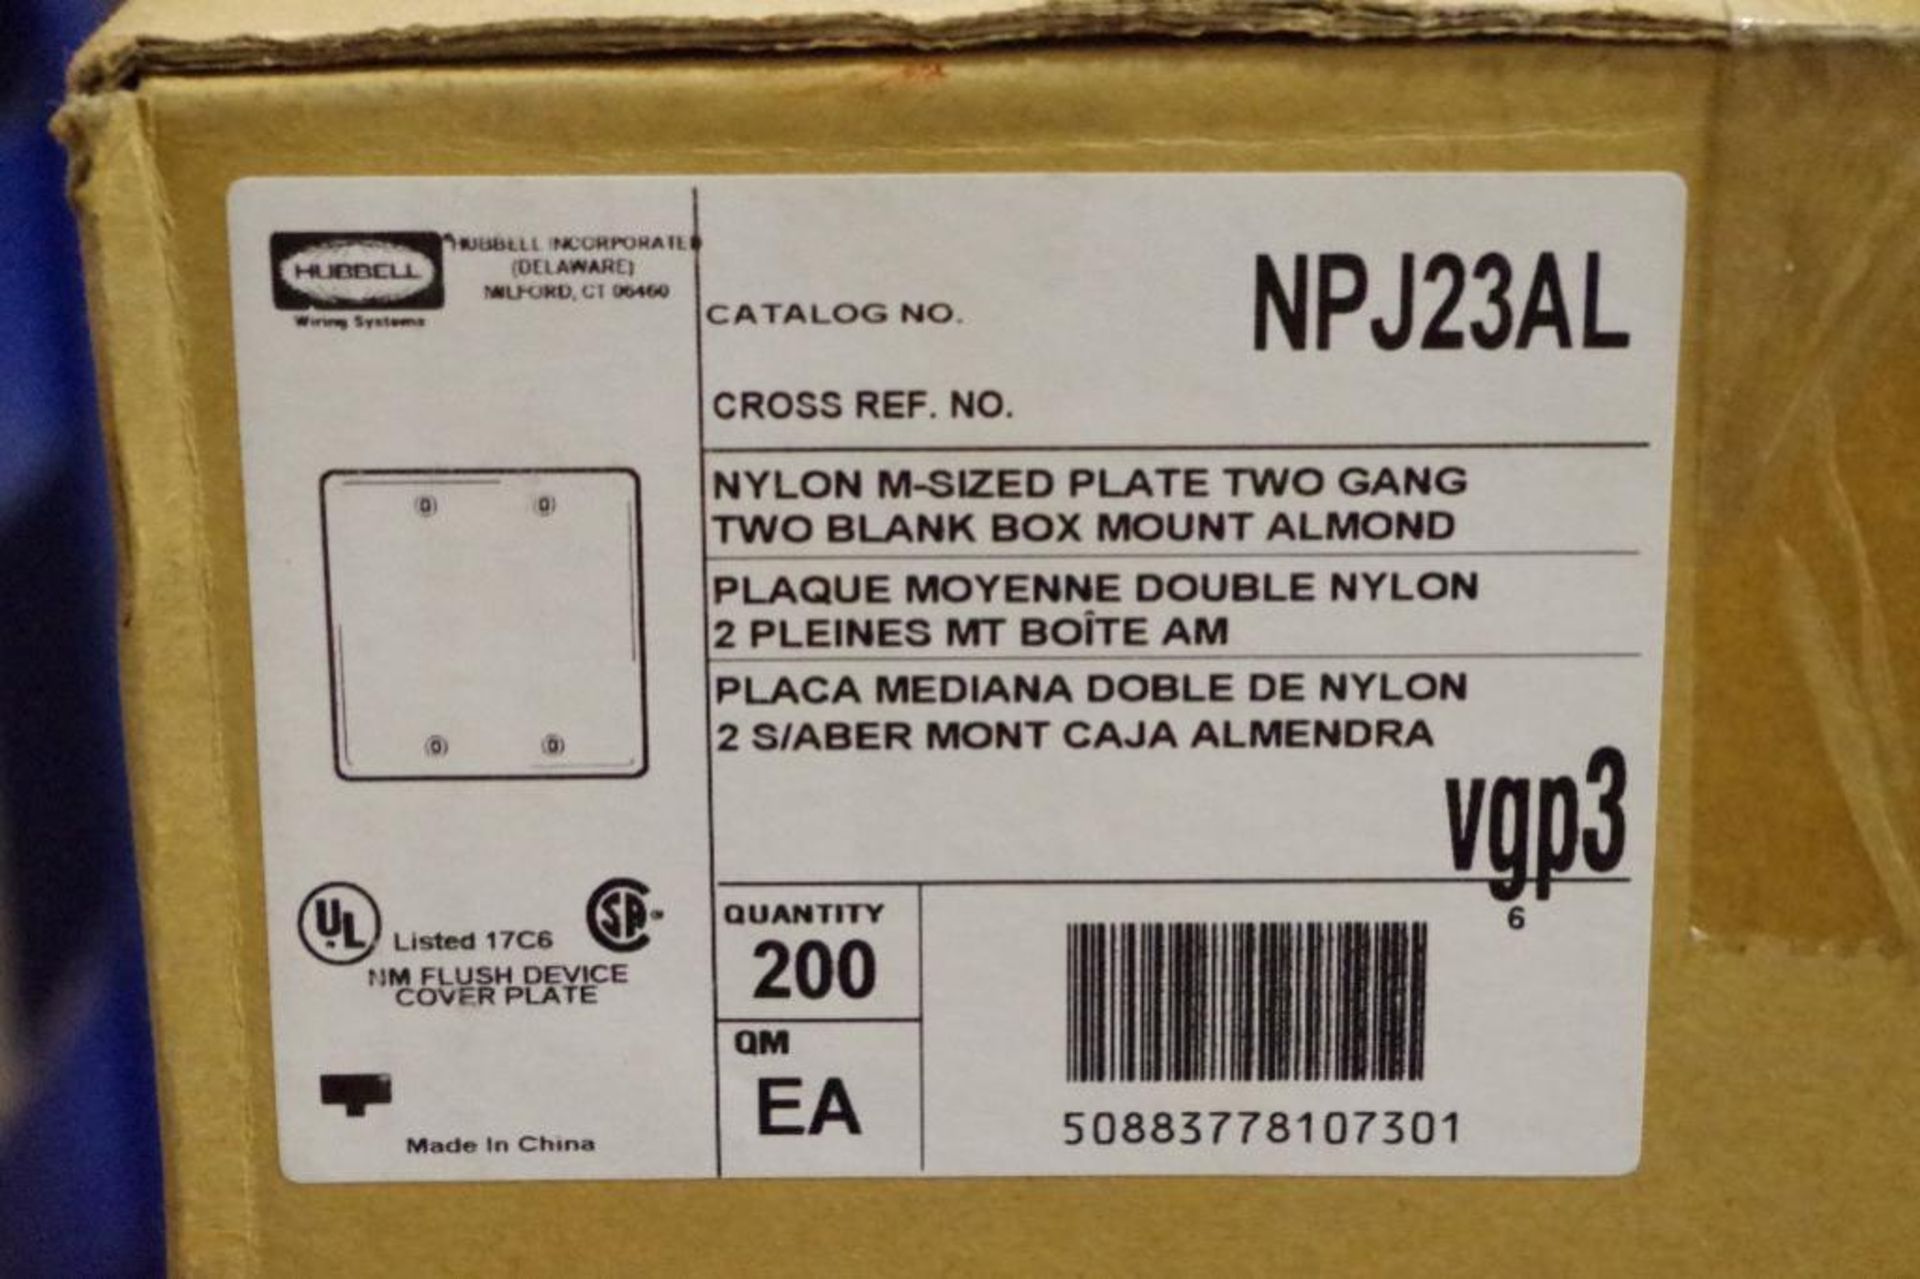 (4) NEW Cases HUBBELL Nylon M-Sized Plate Two Gang Two Blank Box Mount Almond (4 Cases of 200) - Image 2 of 4